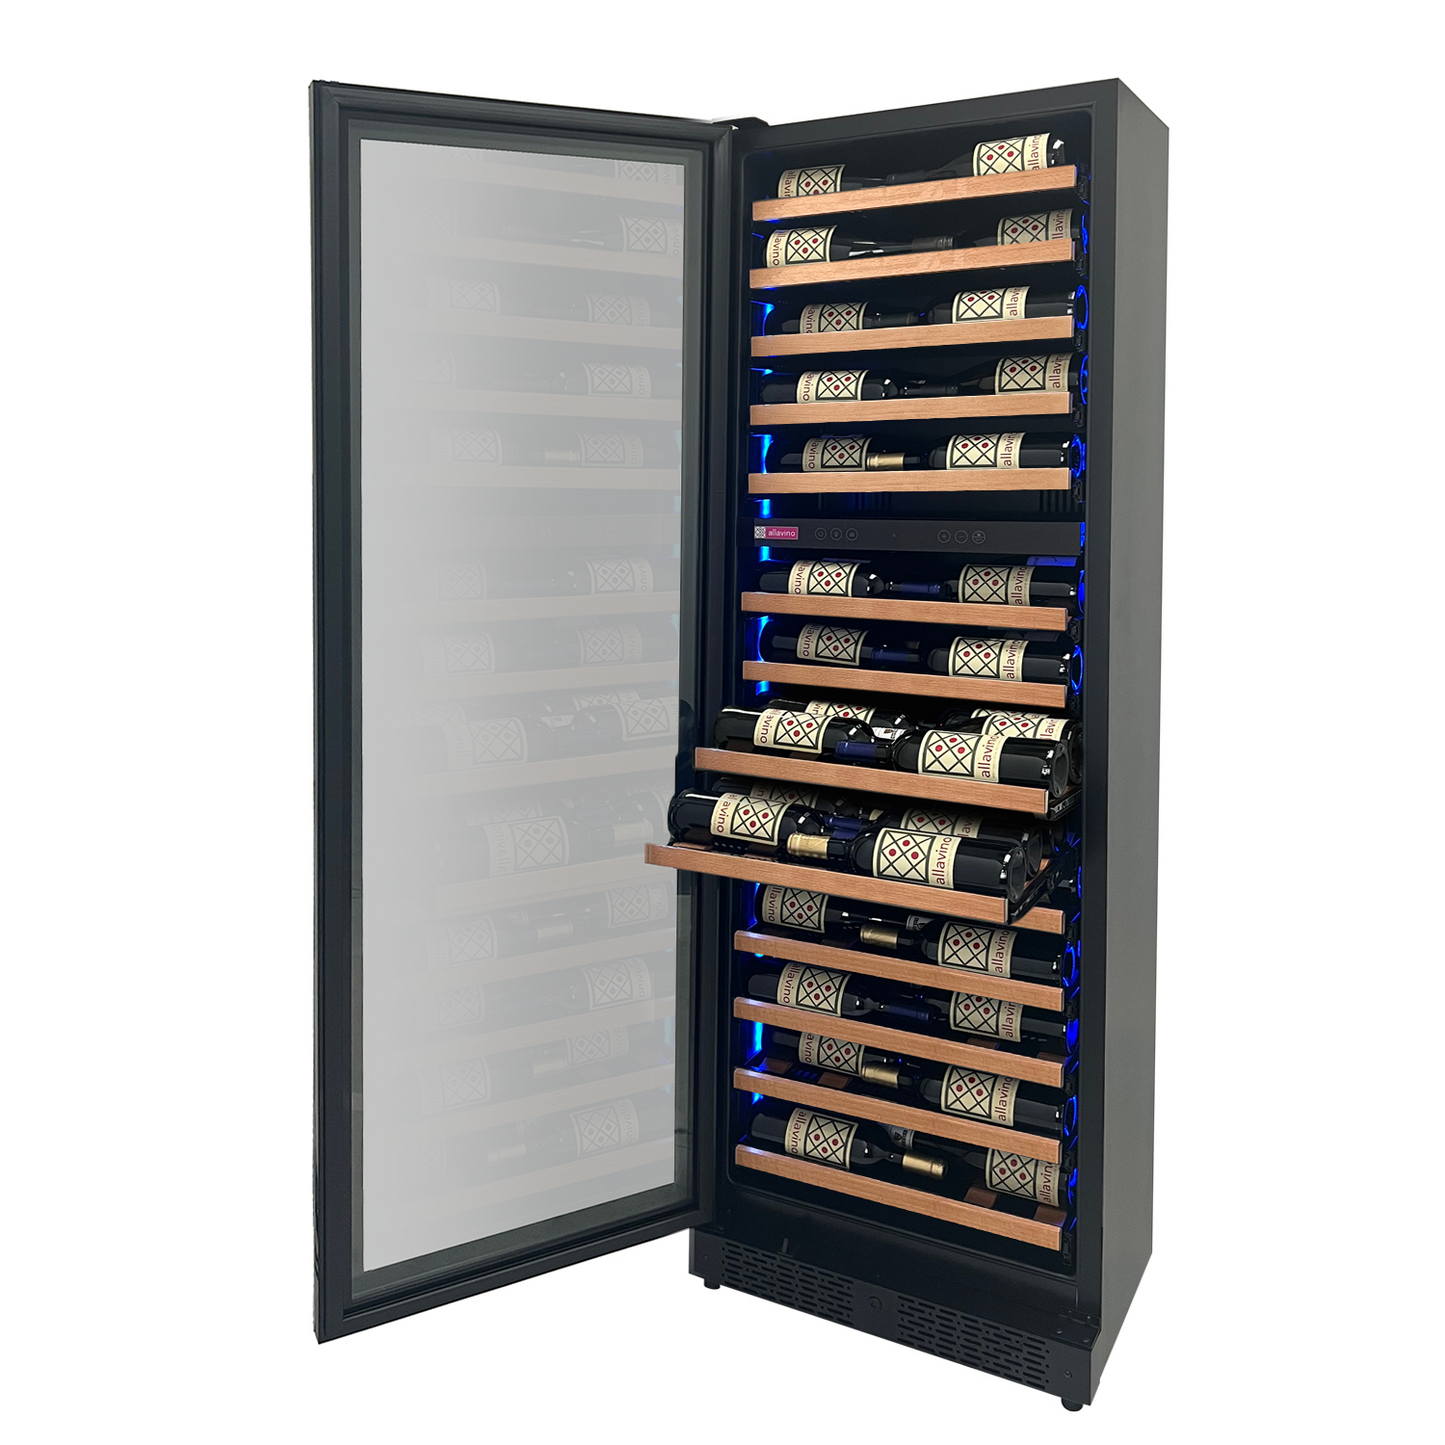 Allavino Reserva Series 67 Bottle 71" Tall Dual Zone Left Hinge Black Shallow Wine Refrigerator with Wood Front Shelves